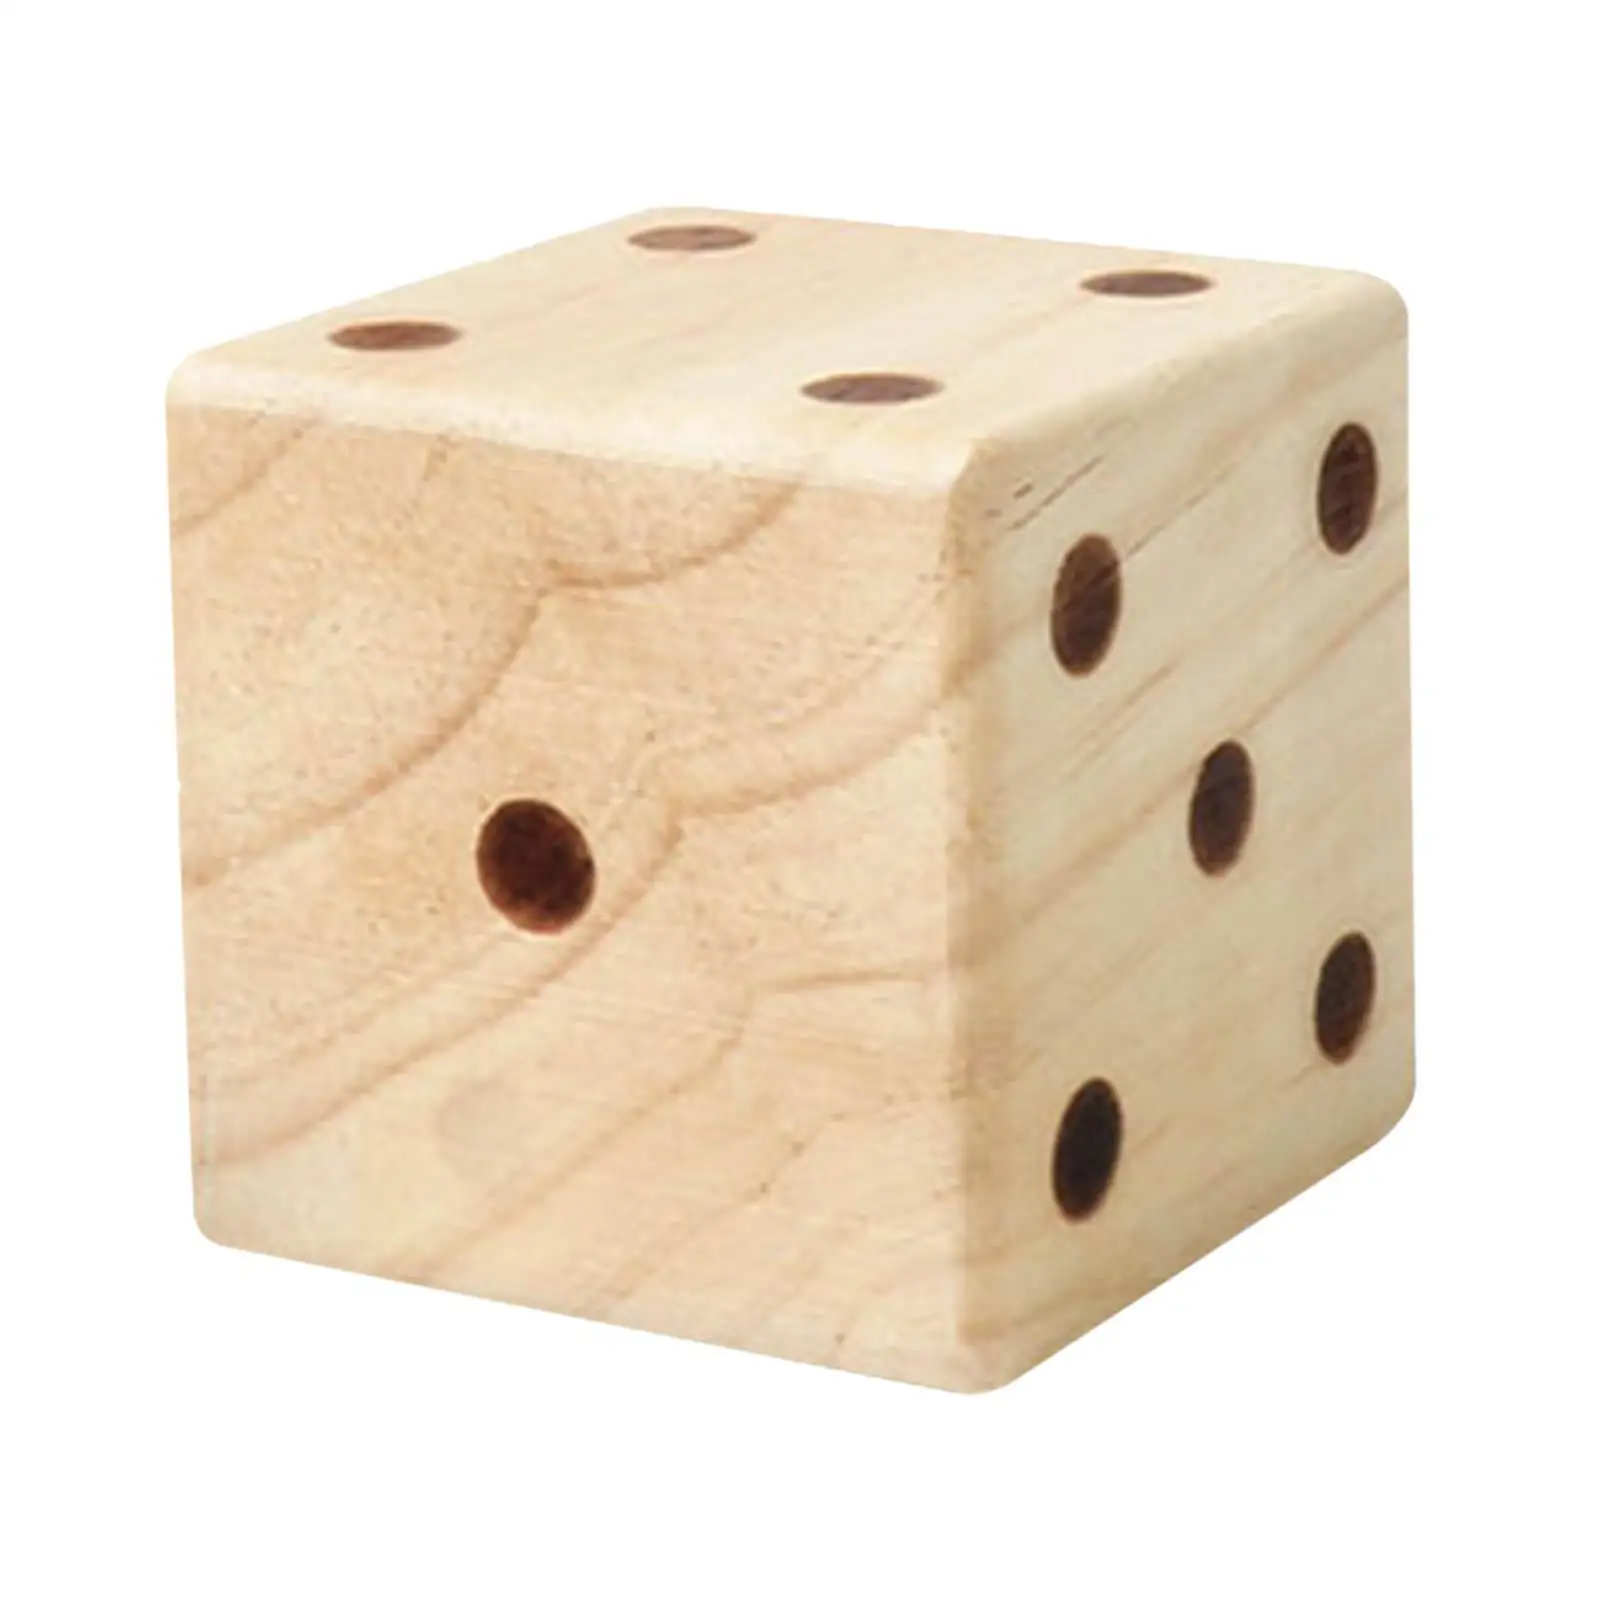 Giant Wooden Yard Dice 7cm/2.36inch Role Playing Dice for Game Outdoor Indoor Beach Family Adults